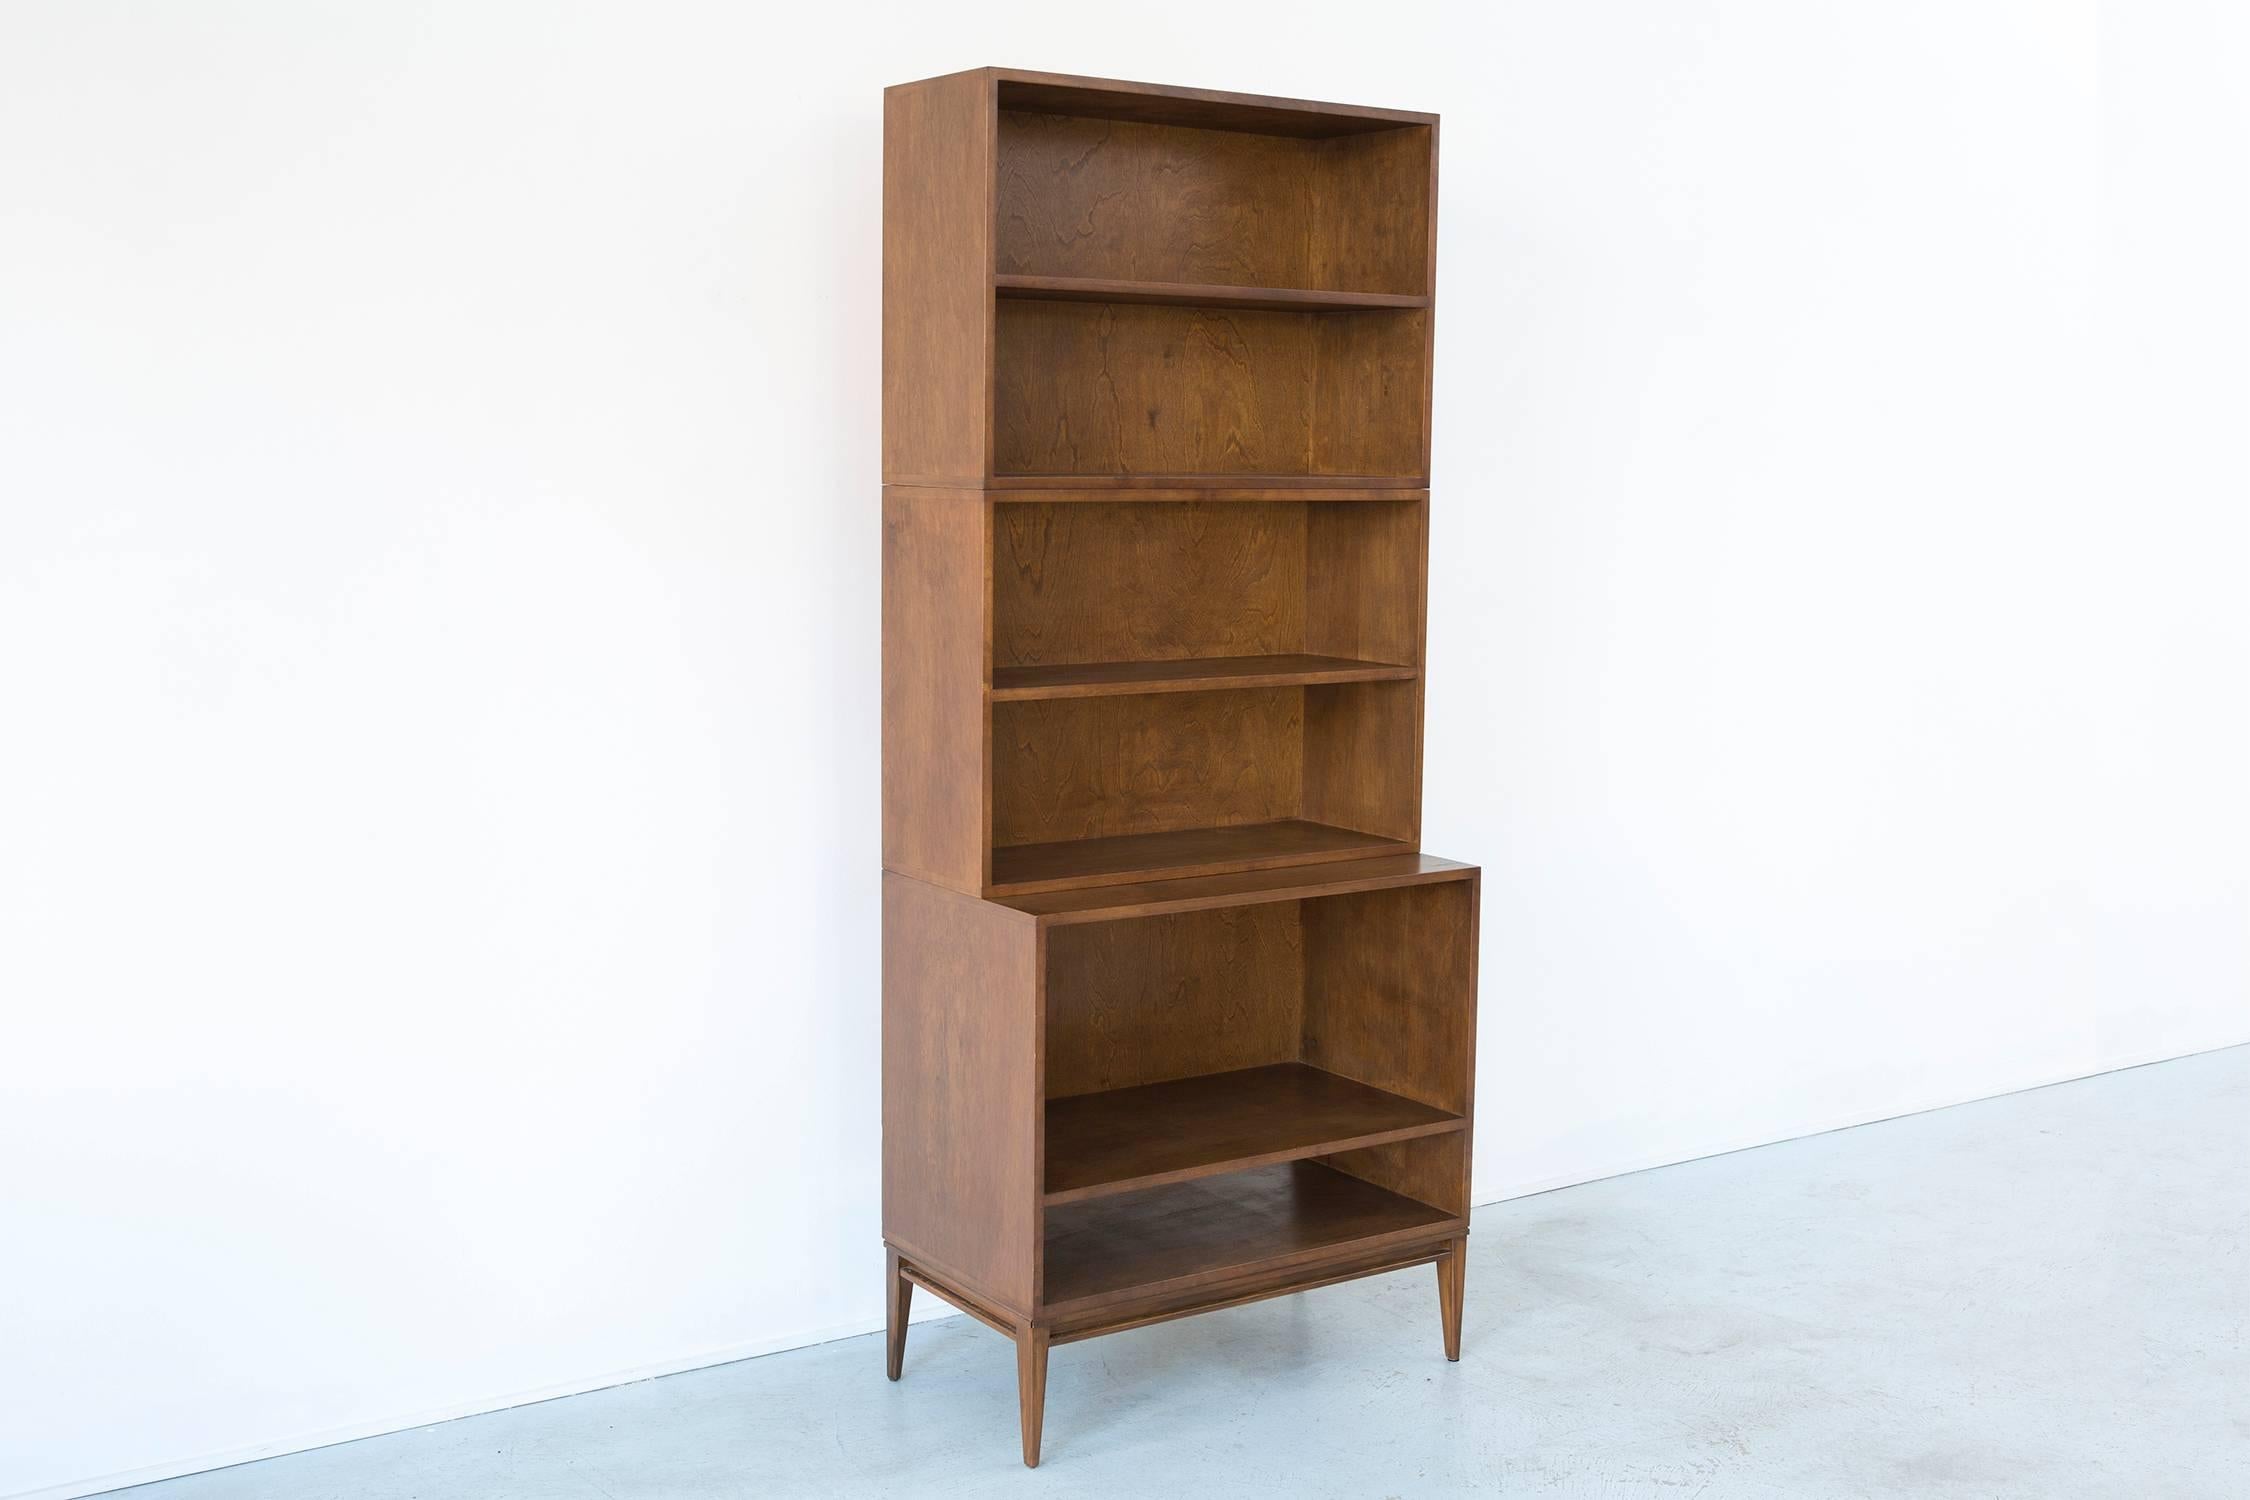 Wall unit,

designed by Paul McCobb for Planner Group,

USA, circa 1950s.

Maple.

Measures: 81 ½